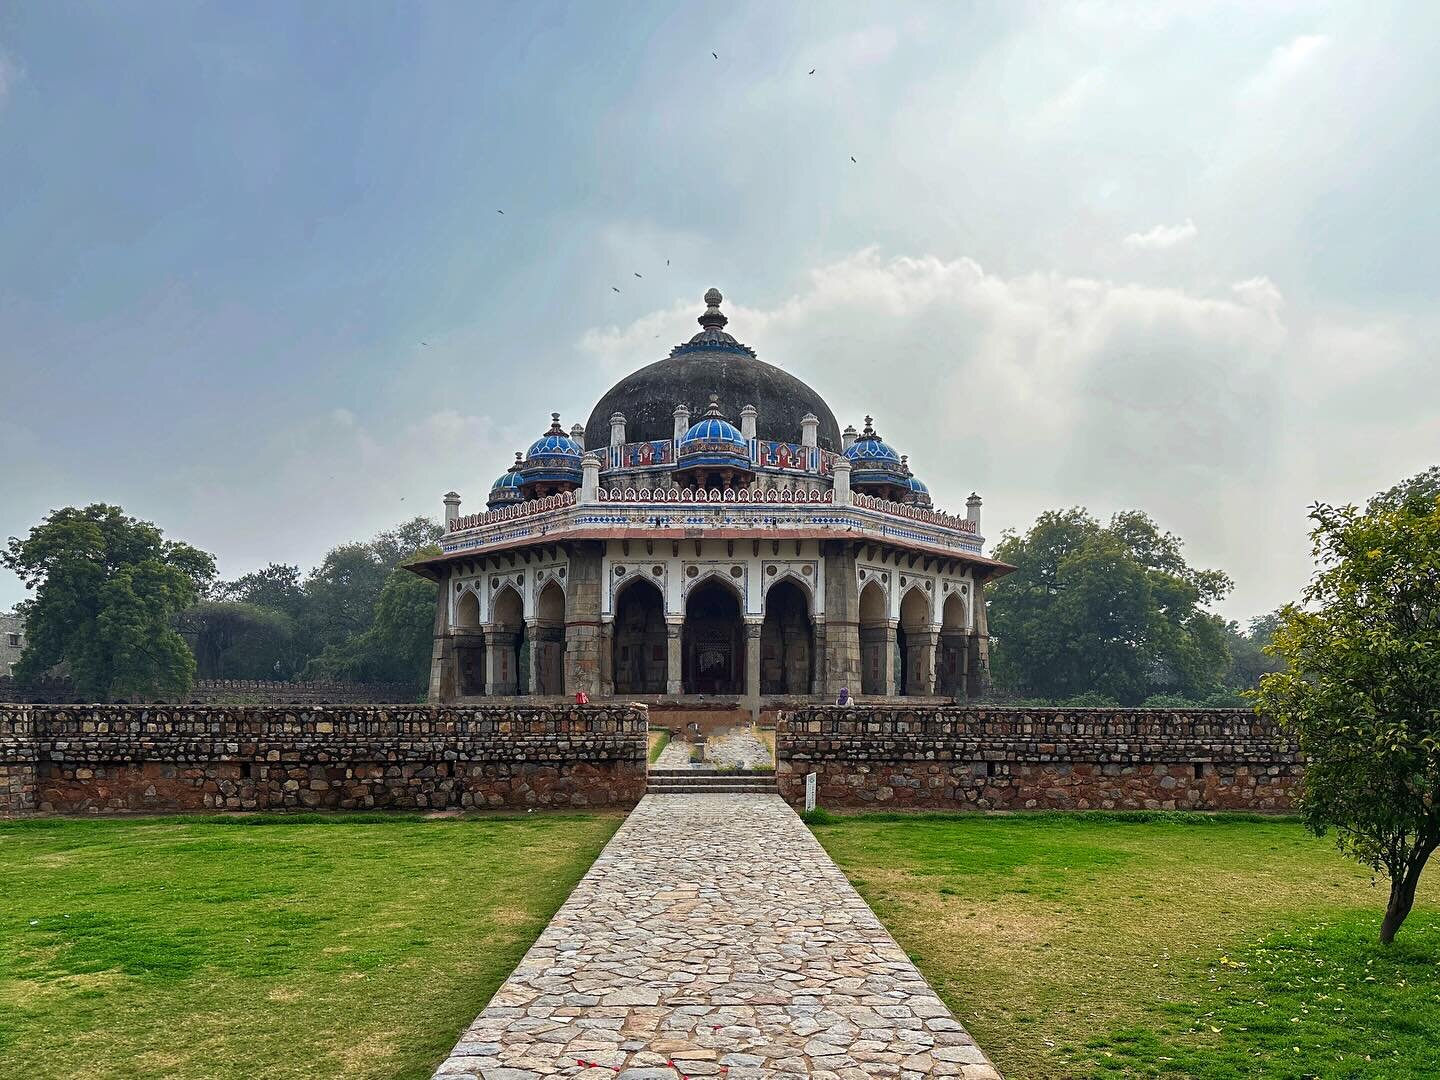 🕌 an afternoon @ humayun&rsquo;s tomb 

this tomb, built in 1570, paved the way for mughal architecture in india. it was the first garden tomb in the country and inspired many other mausoleums and buildings, including the taj mahal. 🌴⛲️ the grounds